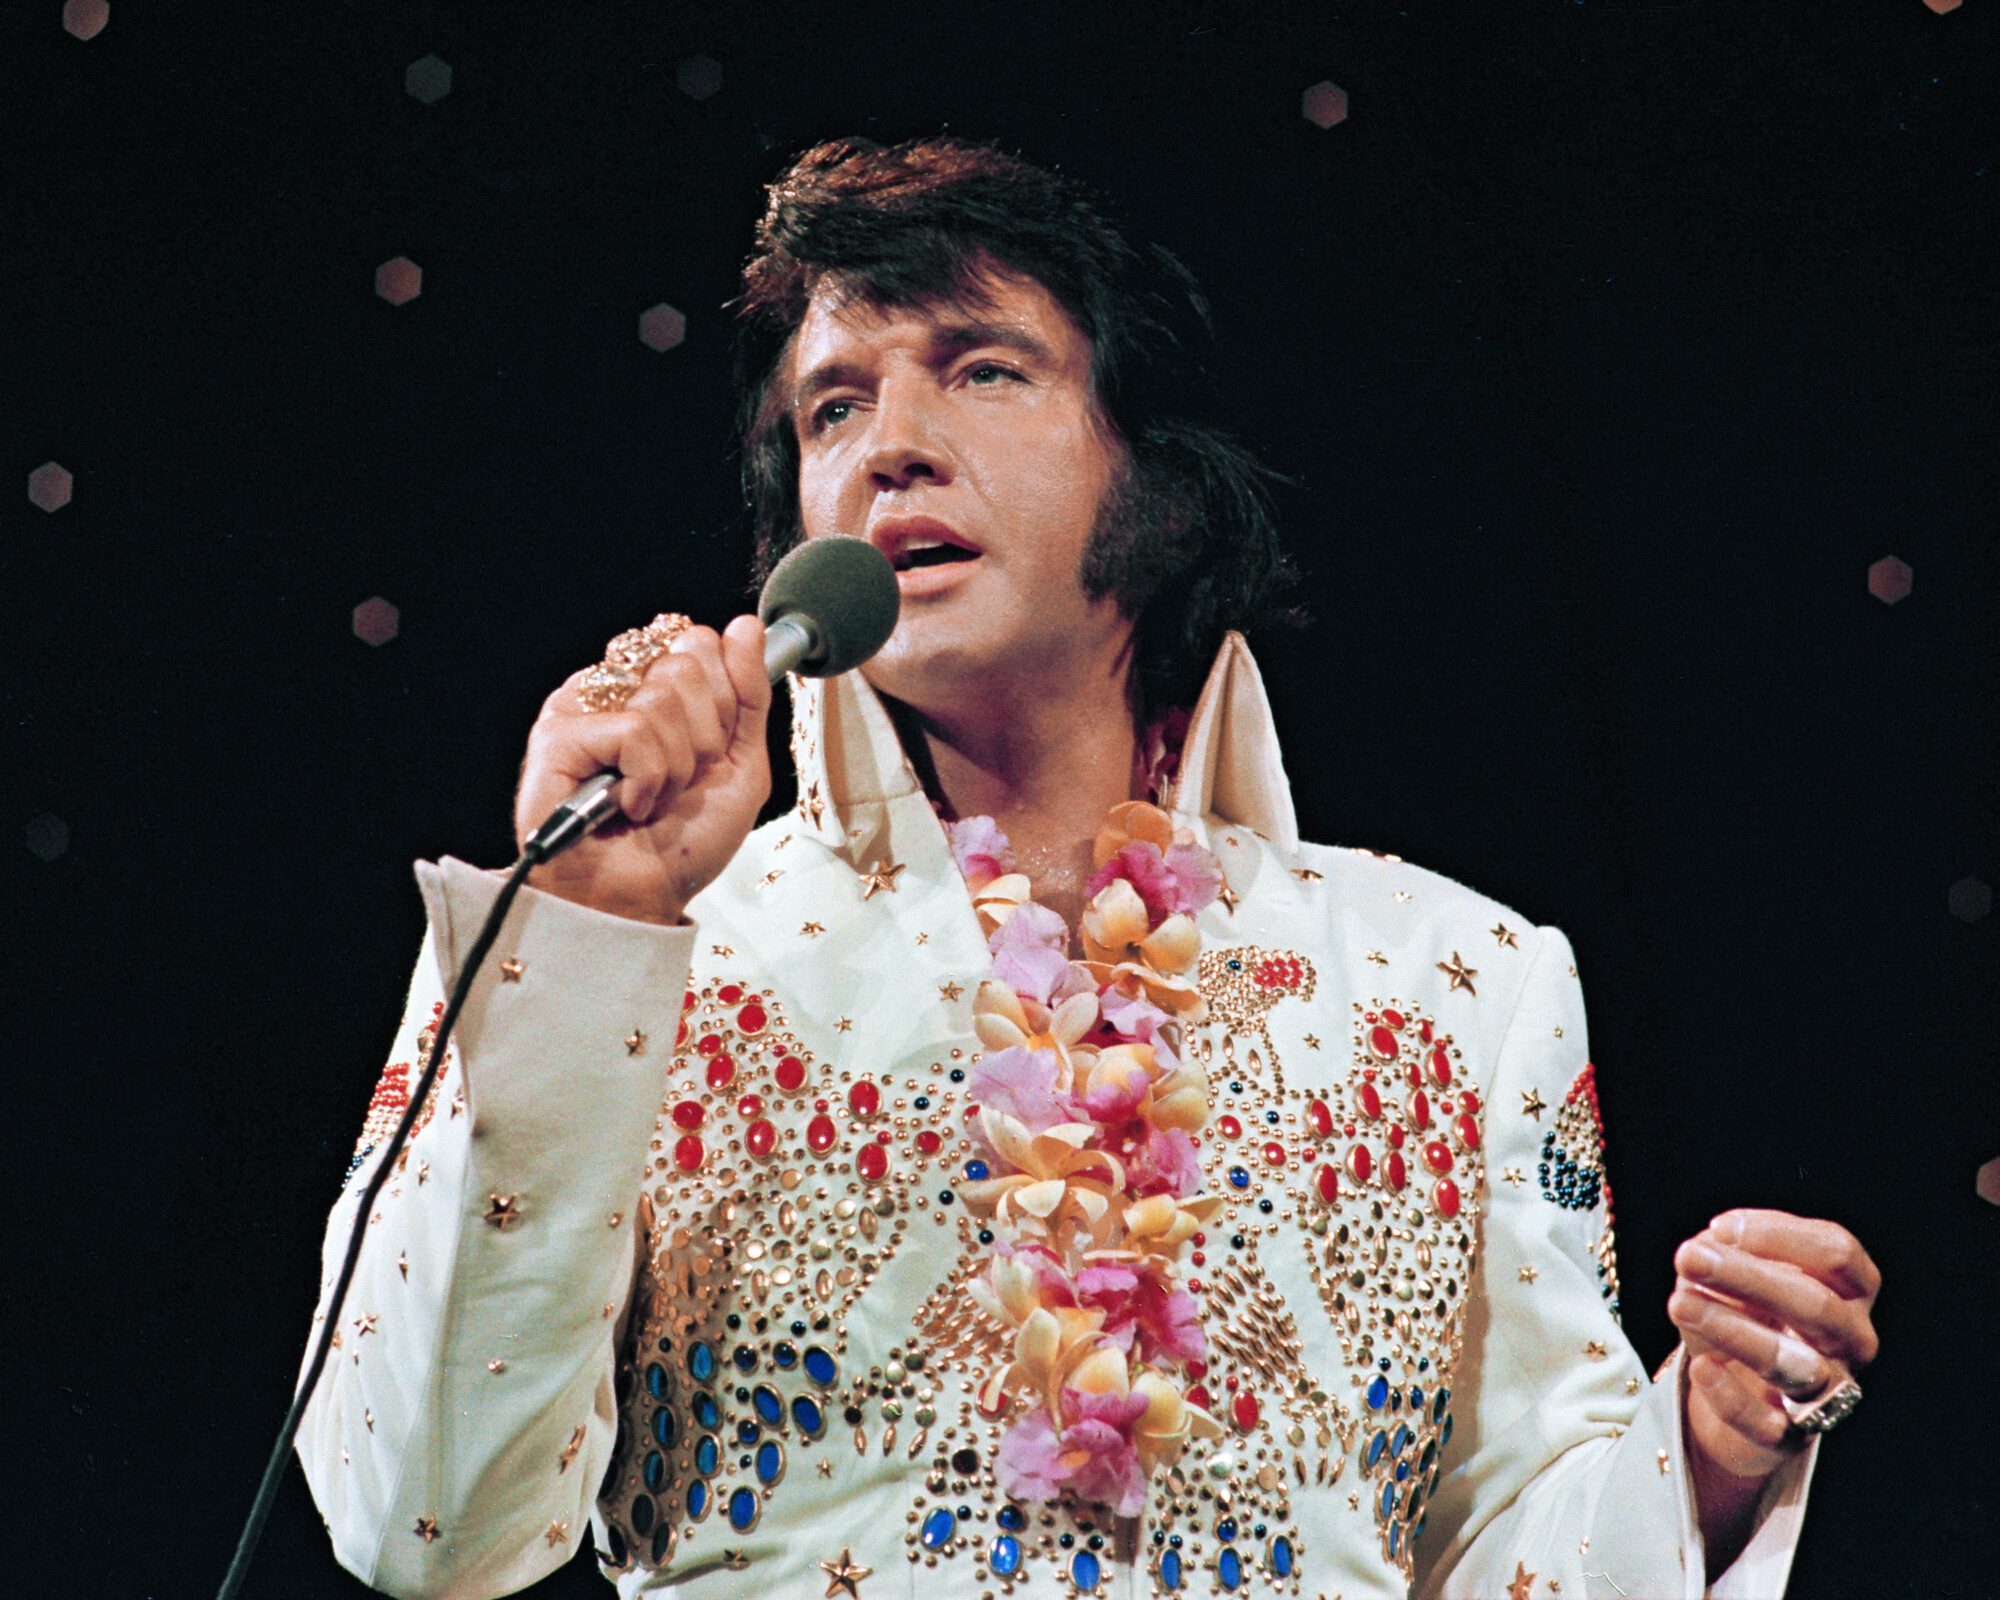 FILE PHOTO: Elvis Presley performs at the "Aloha from Hawaii' concert special in January 1973, in Honolulu, Hawaii, U.S., in this handout image. Elvis Presley Enterprises LLC/Handout via REUTERS/File Photo